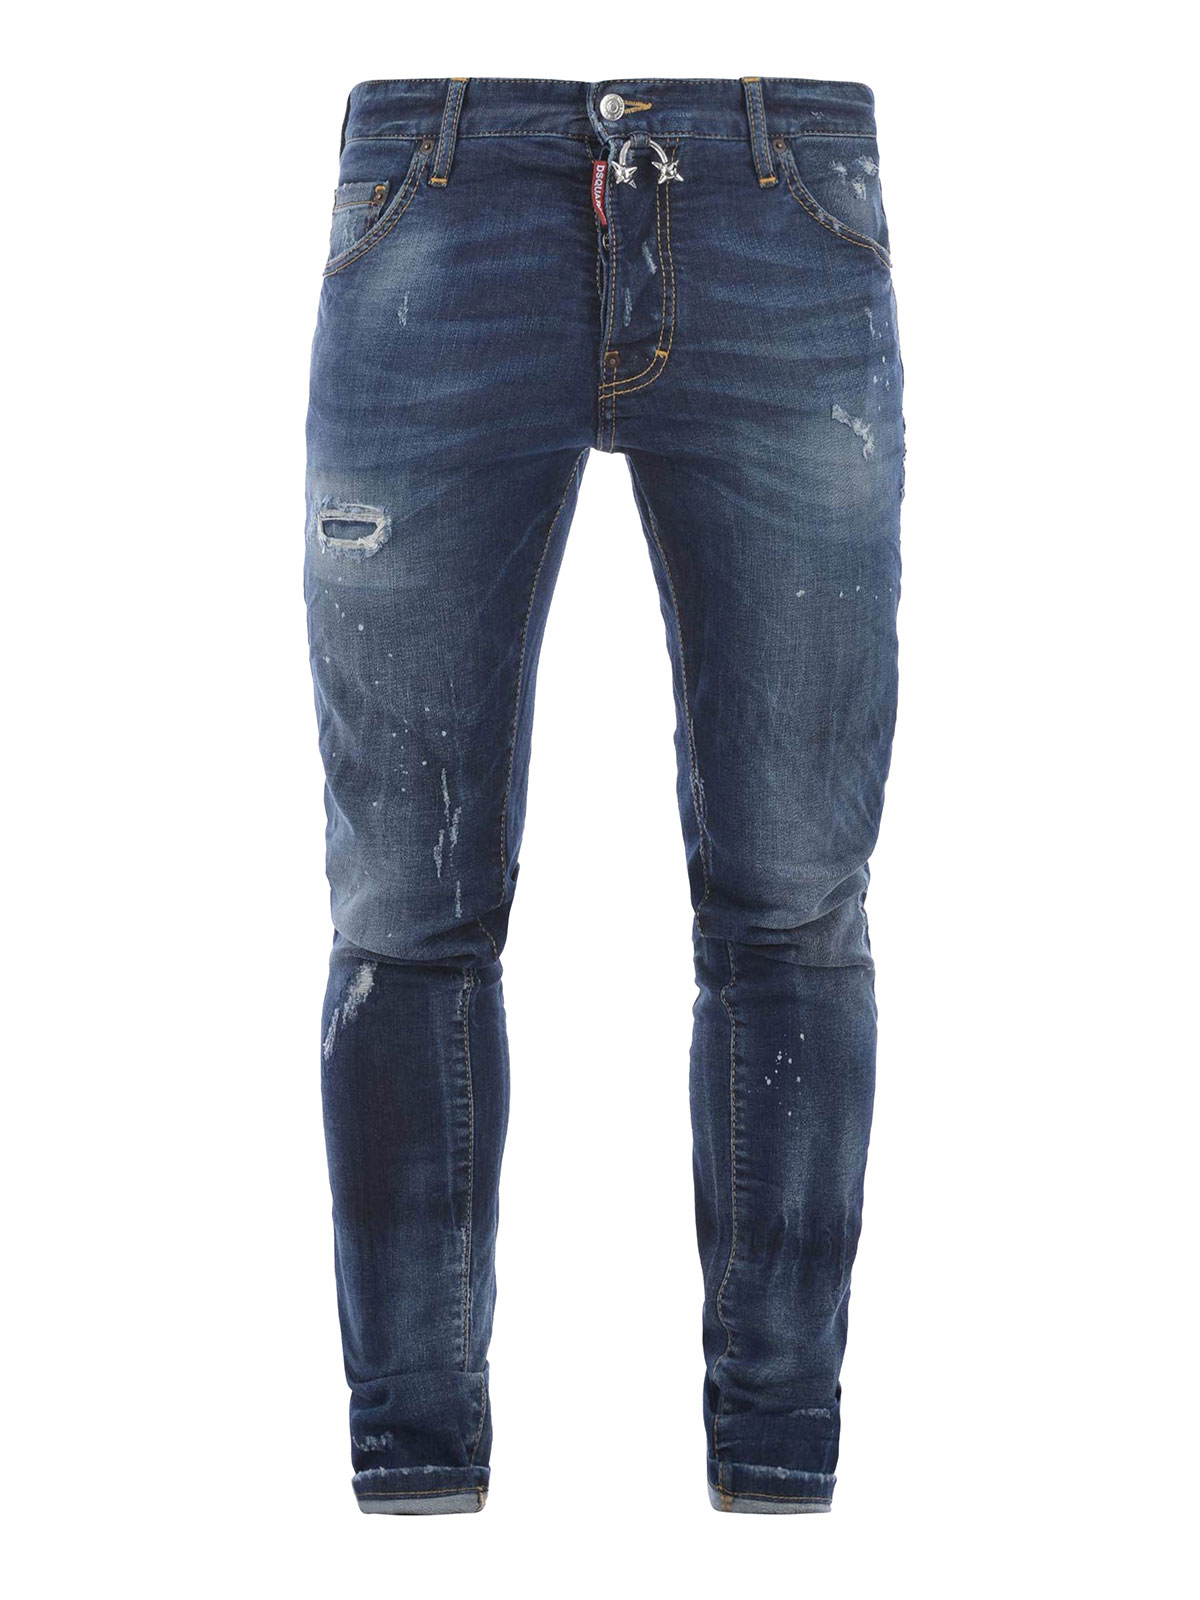 Skinny jeans Dsquared2 - Cool Guy ripped jeans - S74LB0046S30505470